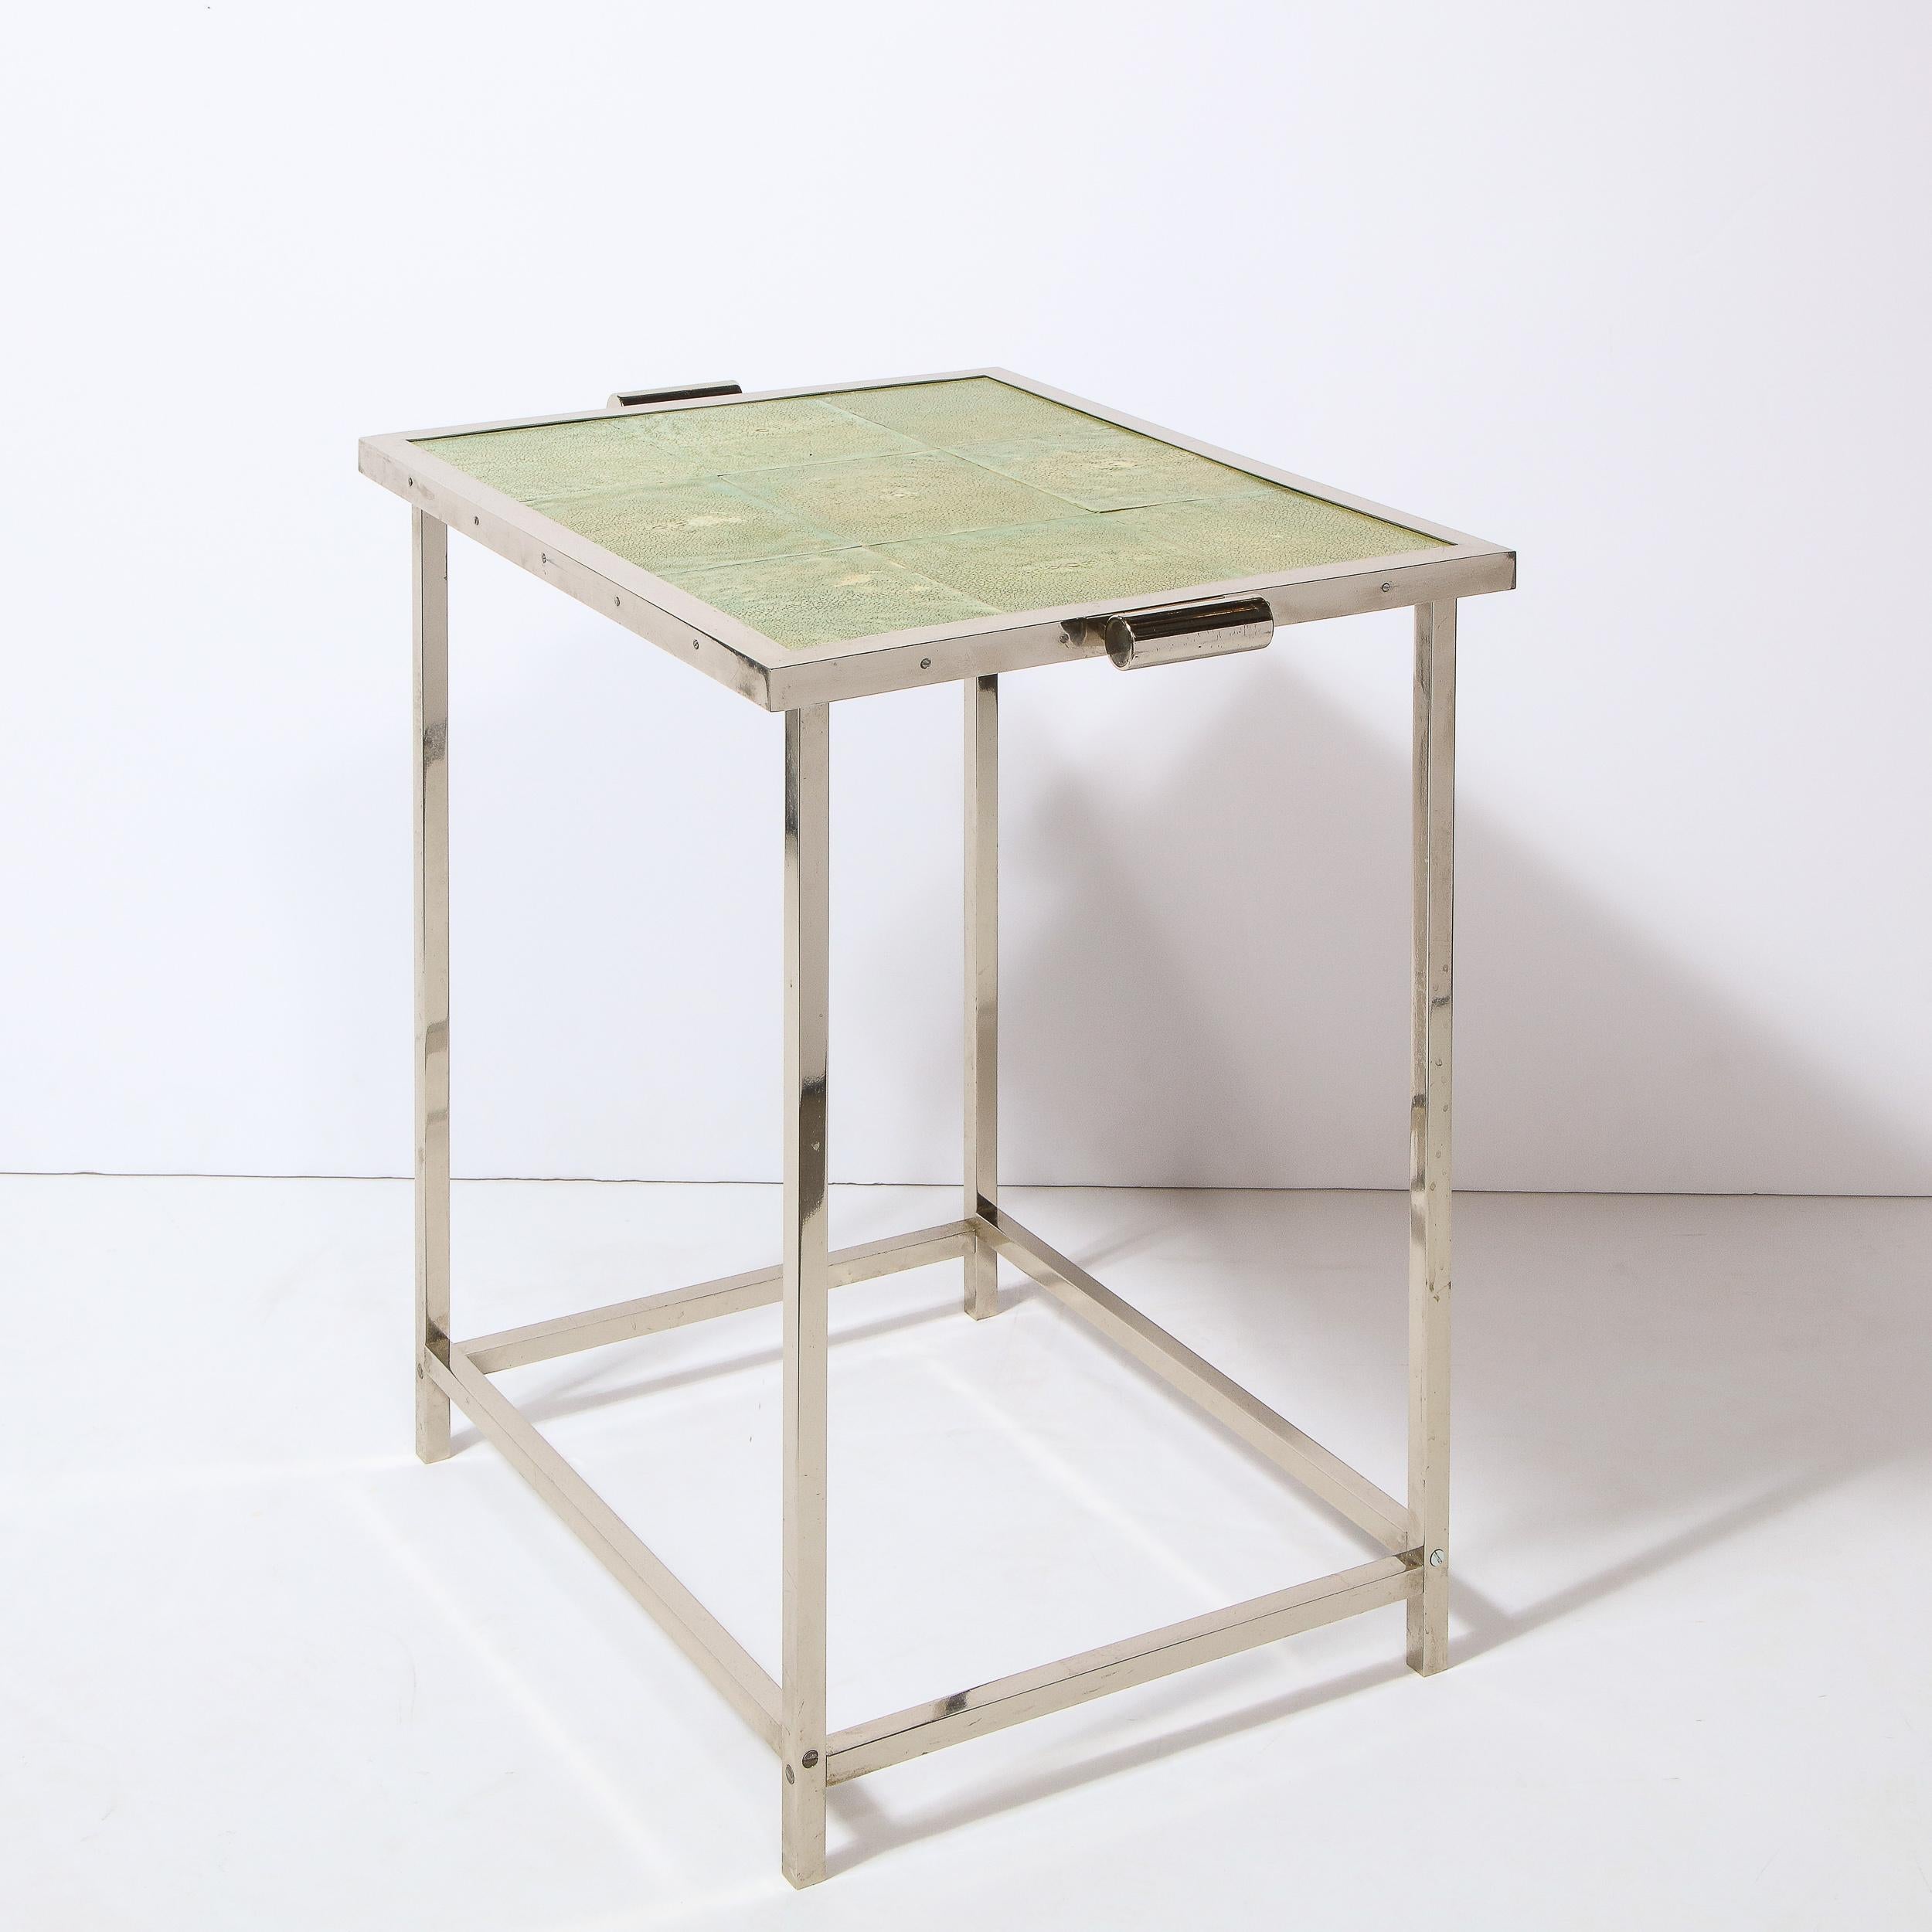 Art Deco Revival Modernist Polished Aluminum Side Table with Shagreen Top 6